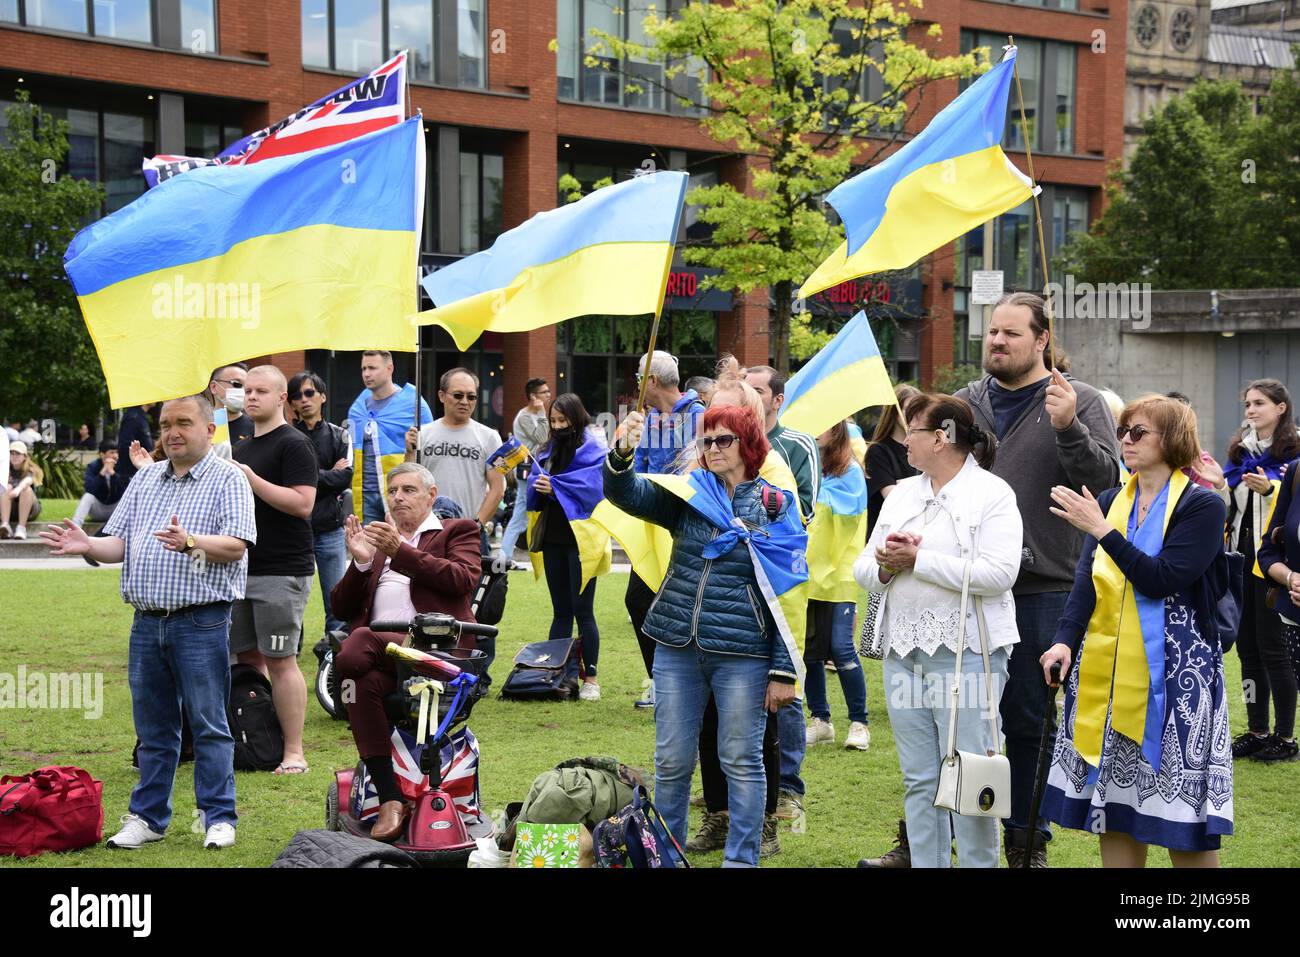 Manchester, UK, 6th August, 2022. “Manchester Stands with Ukraine” anti-war rally, a protest about the Russian invasion of Ukraine in Piccadilly Gardens, central Manchester, England, United Kingdom, British Isles. The protests are organised by the Ukrainian Cultural Centre, Manchester. Credit: Terry Waller/Alamy Live News Stock Photo